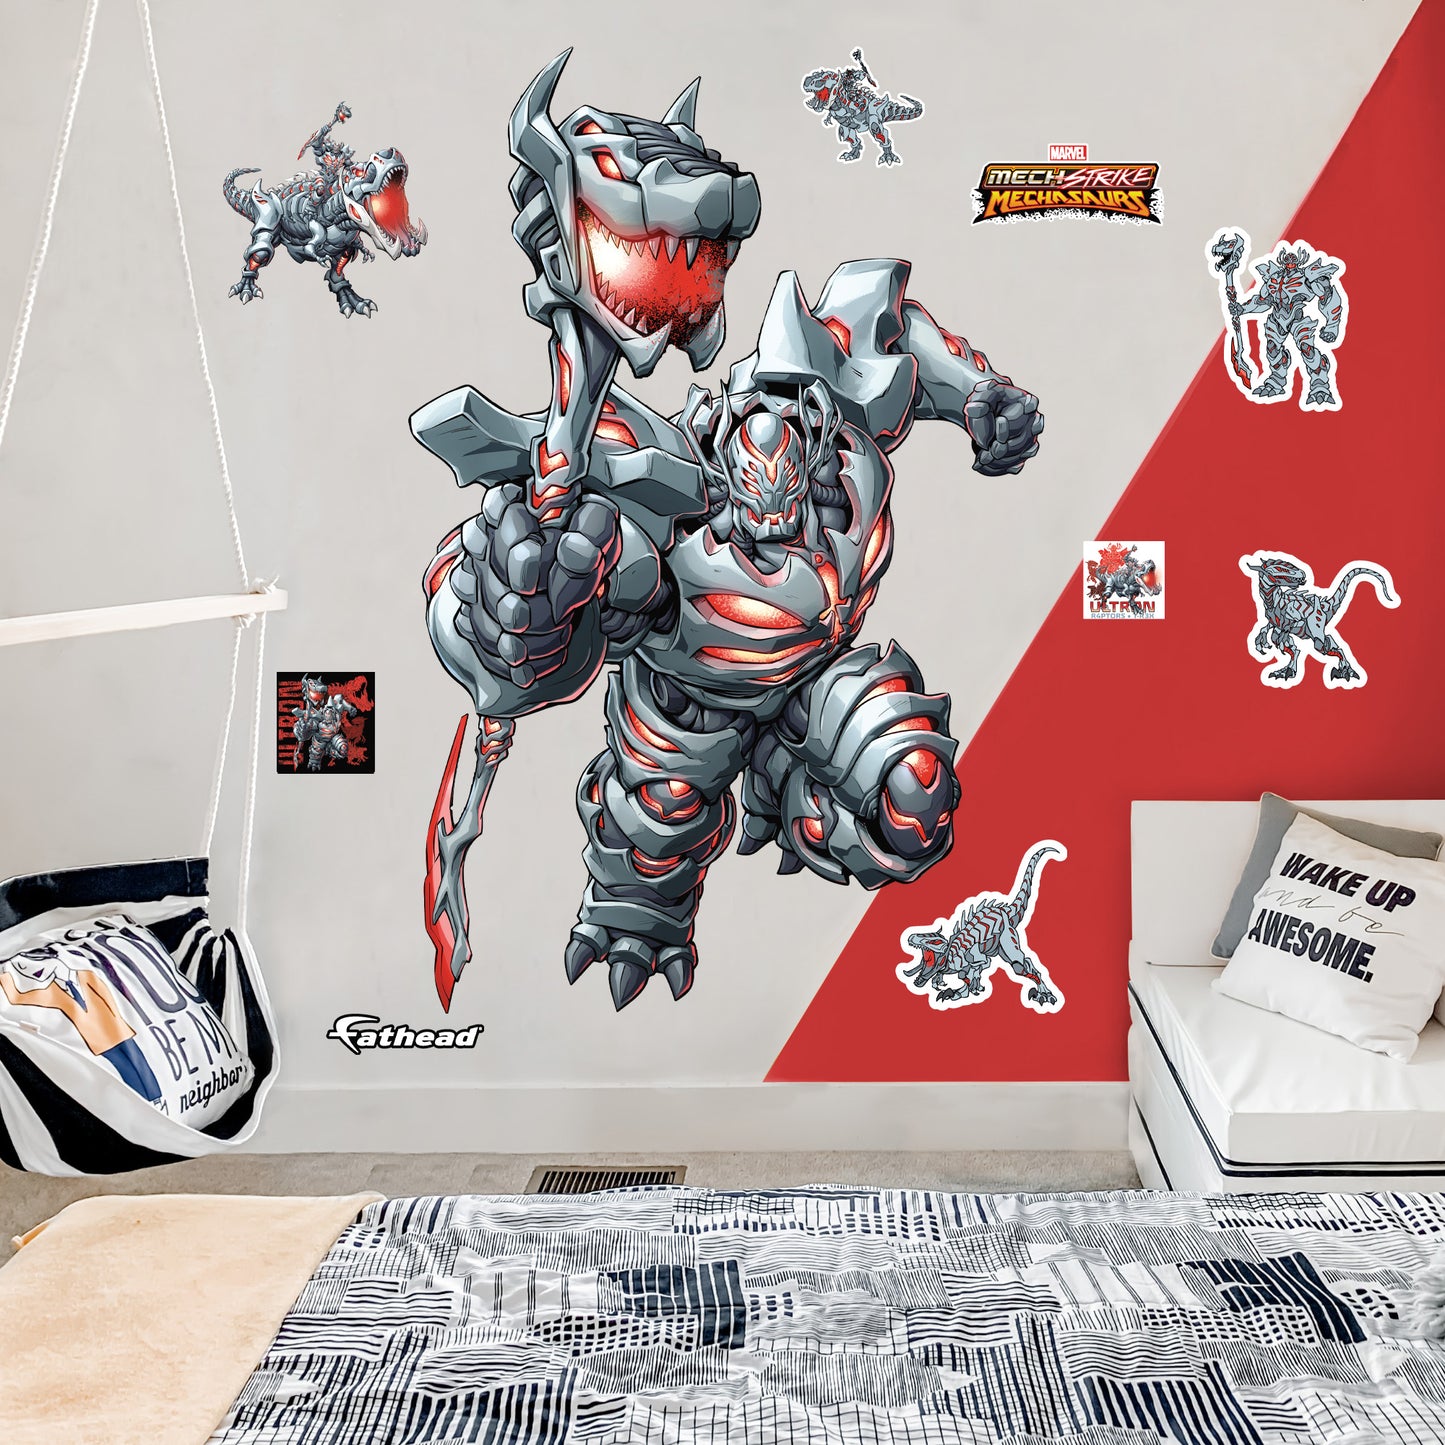 Life-Size Character +9 Decals  (51"W x 77.5"H) 